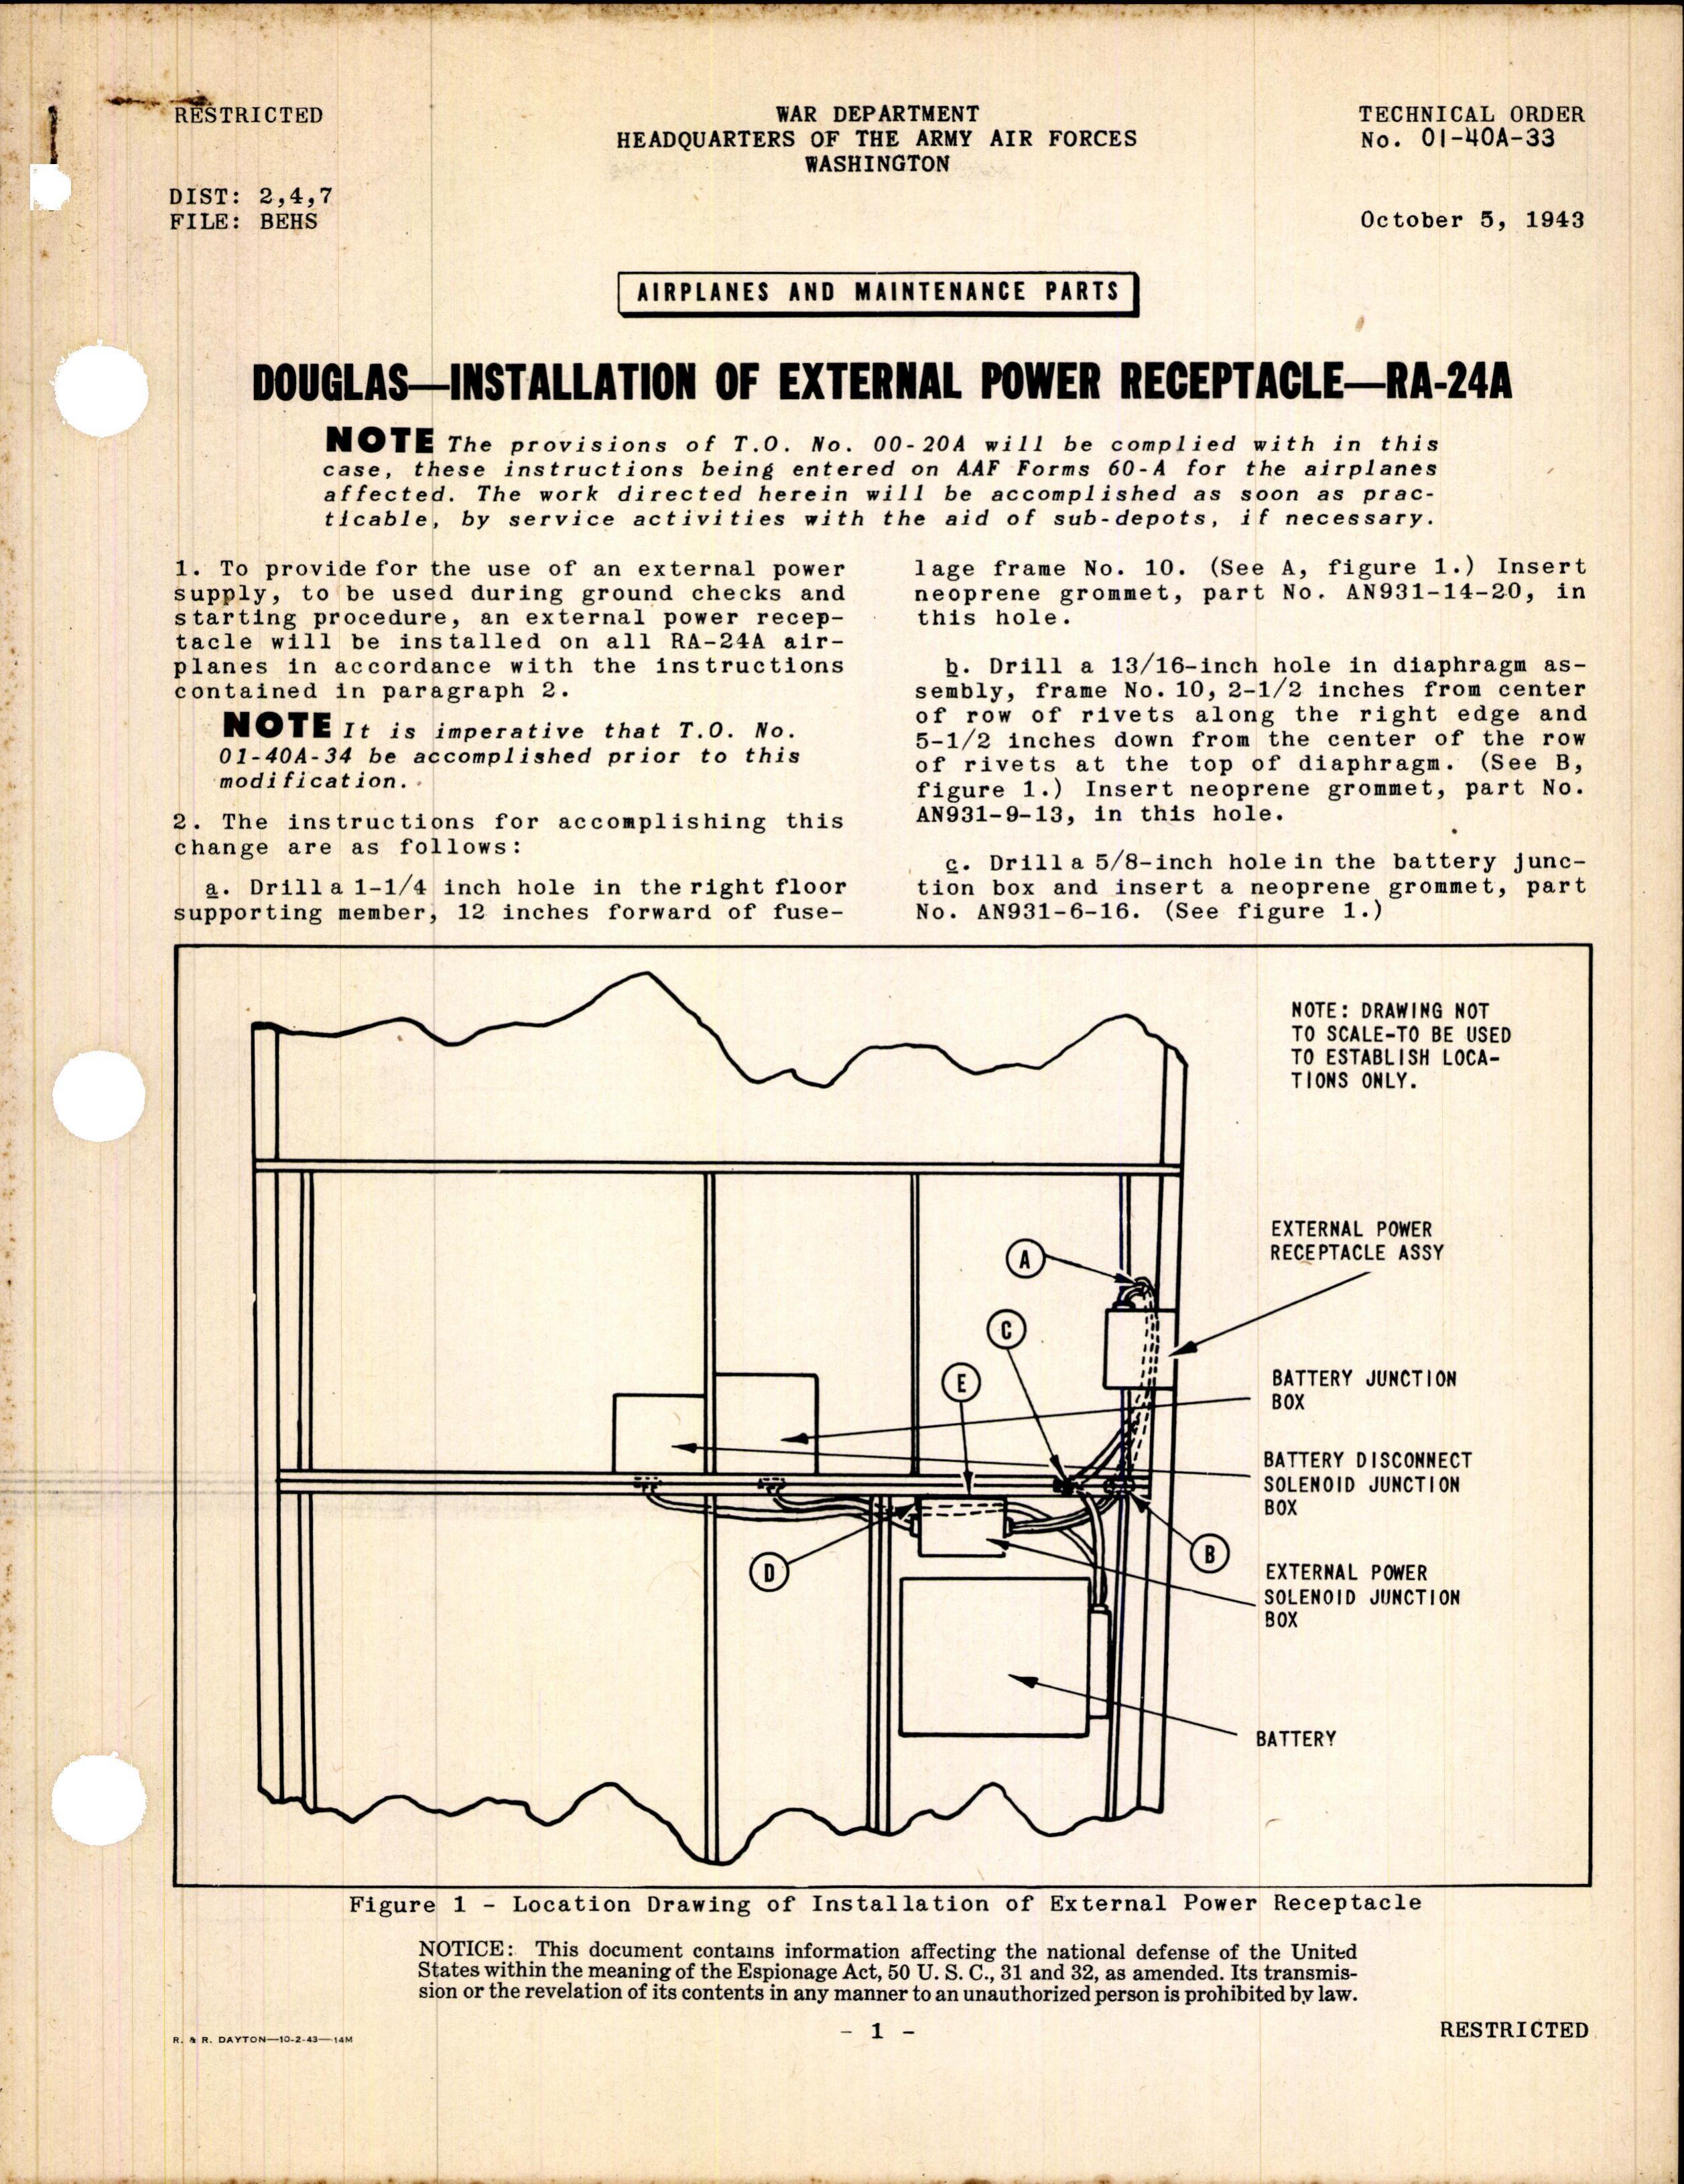 Sample page 1 from AirCorps Library document: Installation of External Power Receptacle for RA-24A